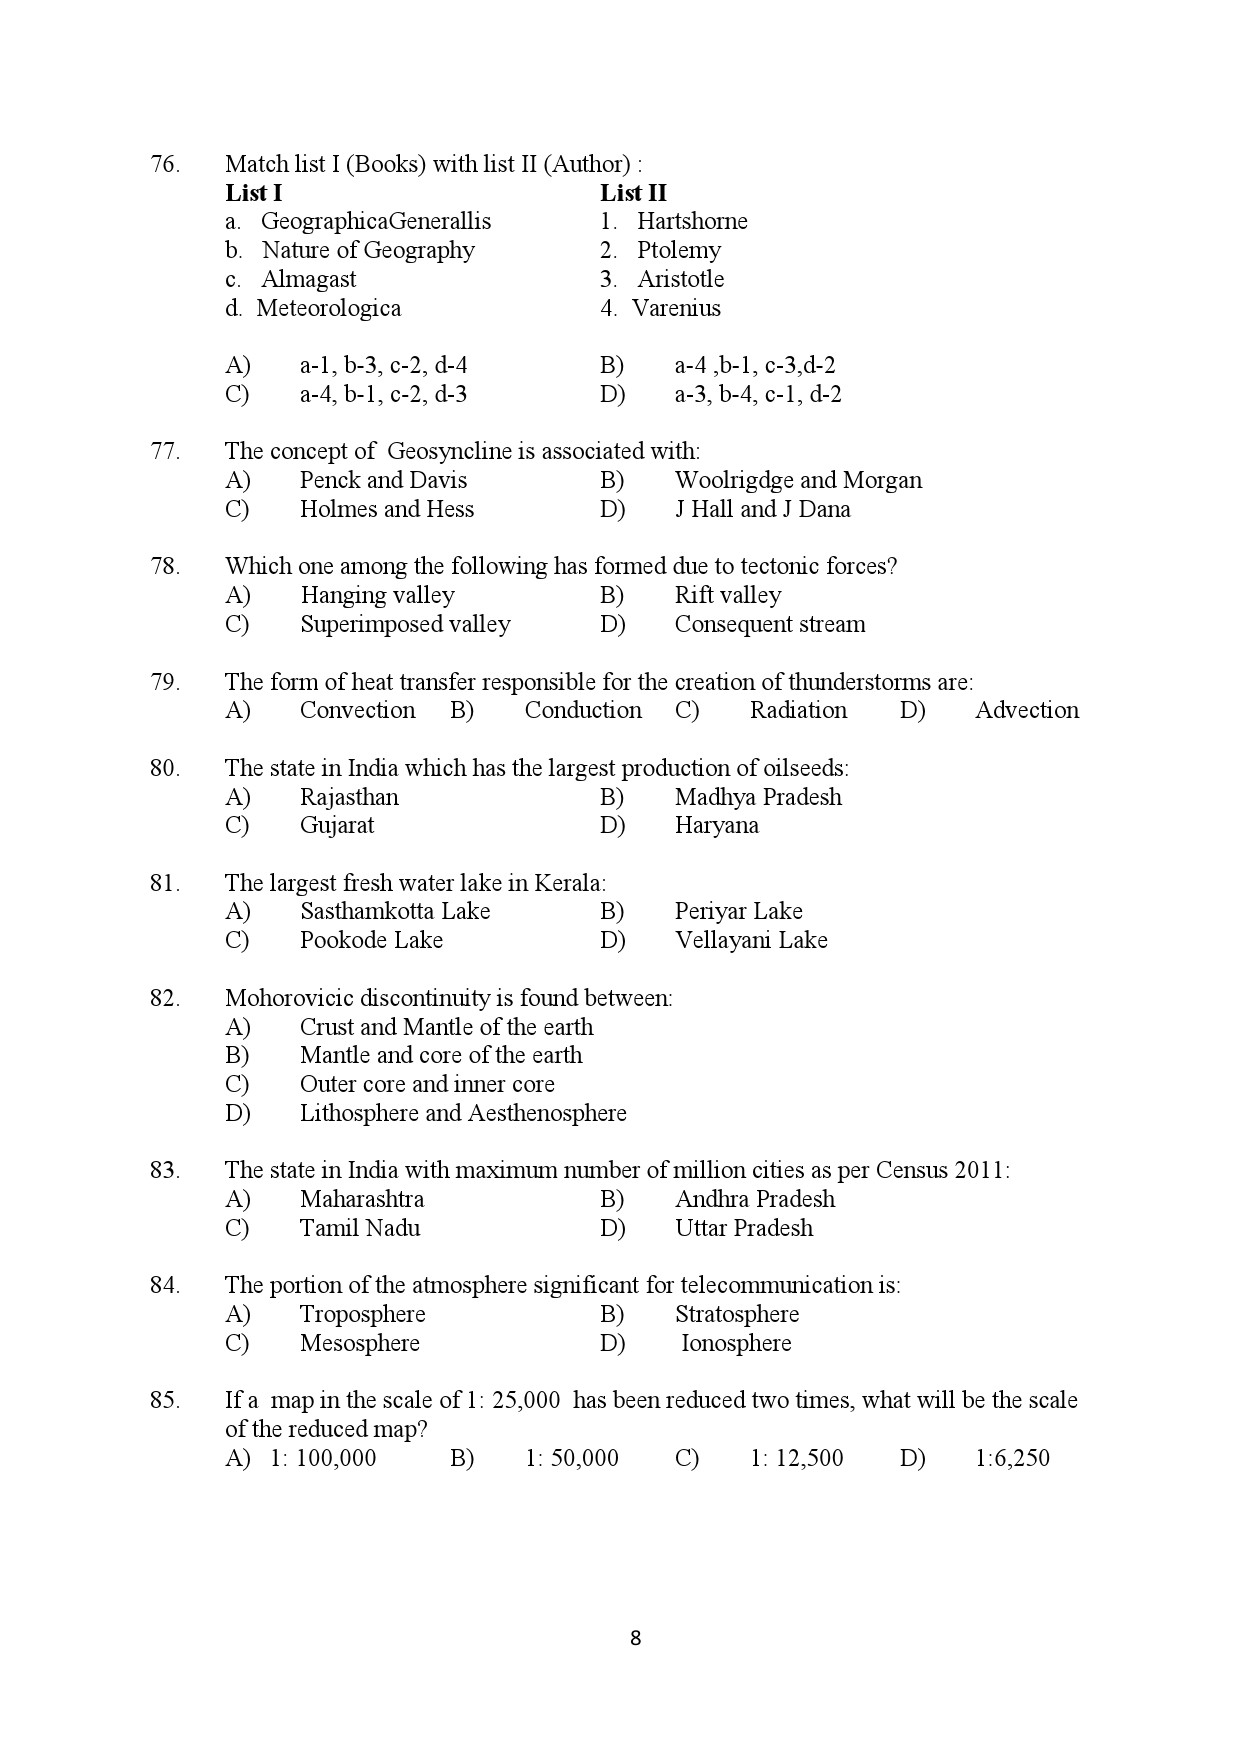 Kerala SET Geography Exam Question Paper February 2020 8